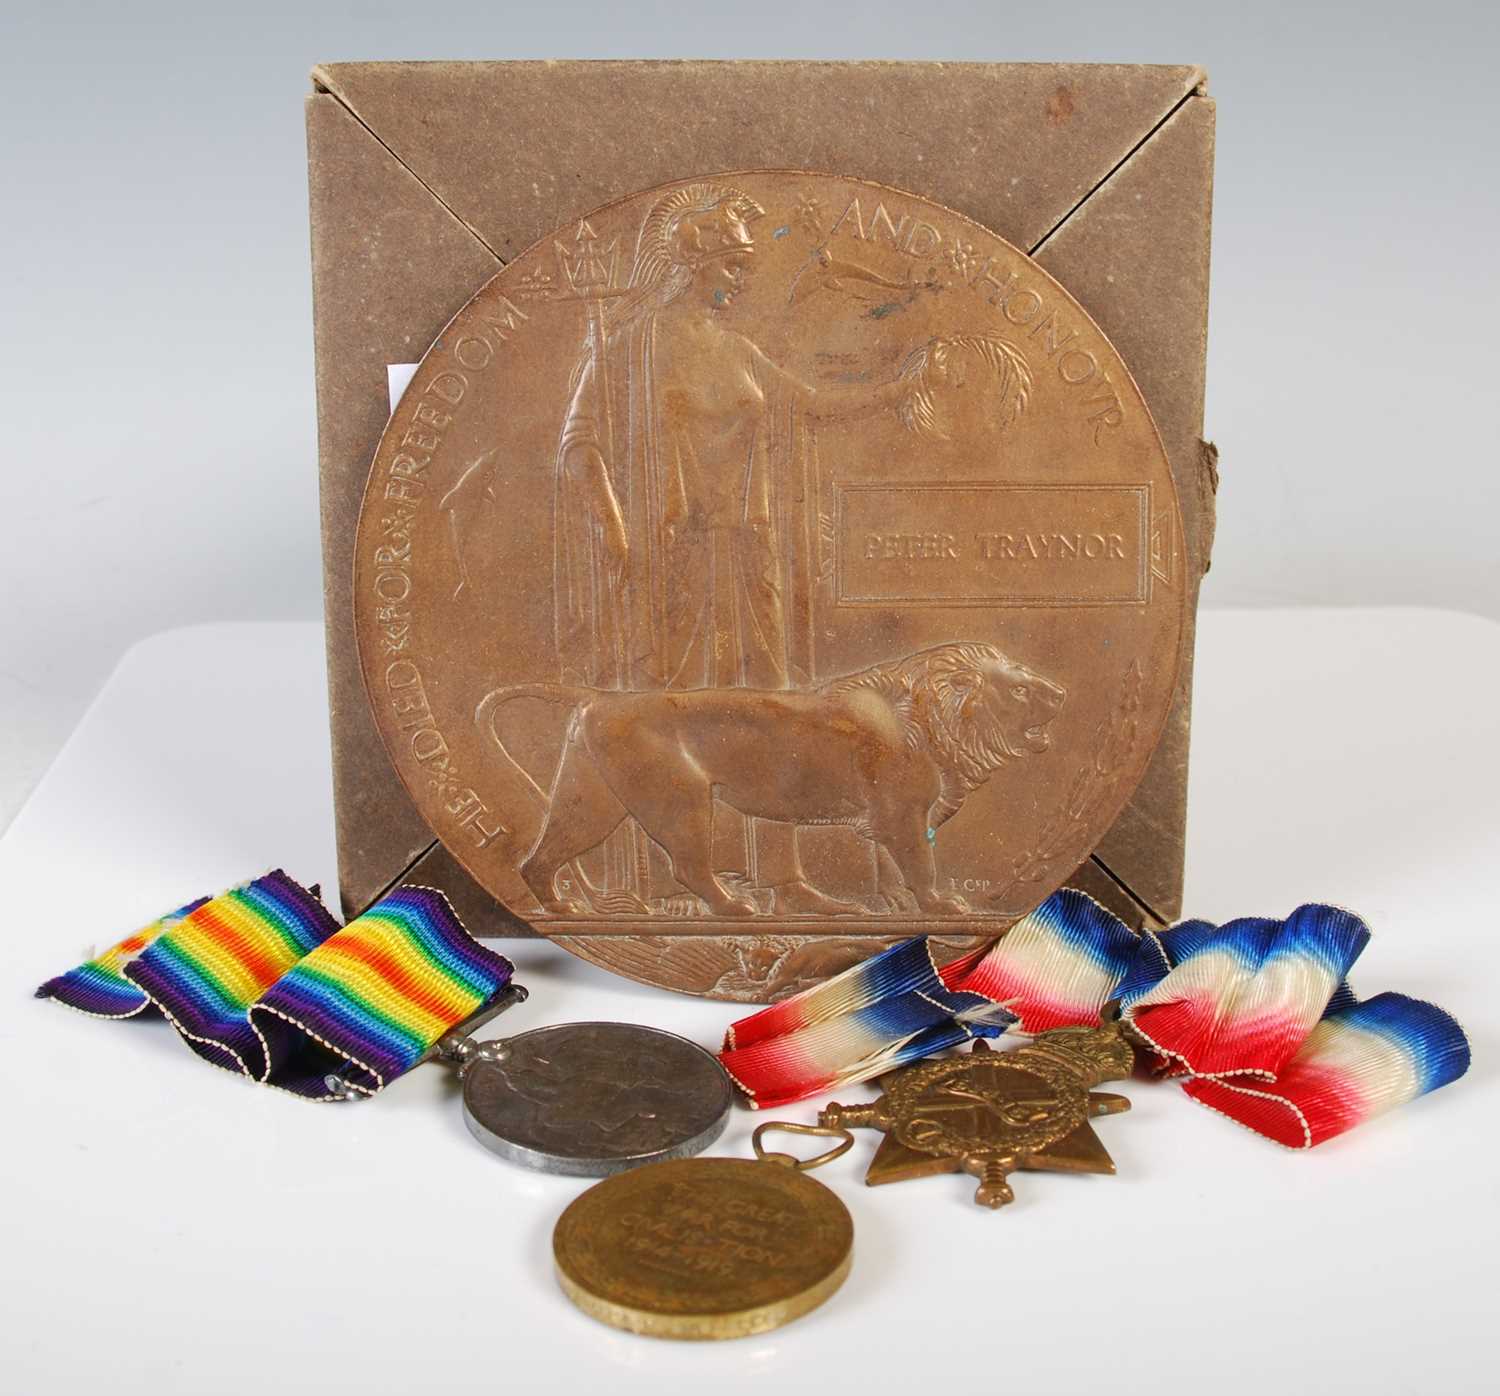 A Great War group of three medals inscribed to '54498 GNR. J. Traynor. R.A' together with a bronze